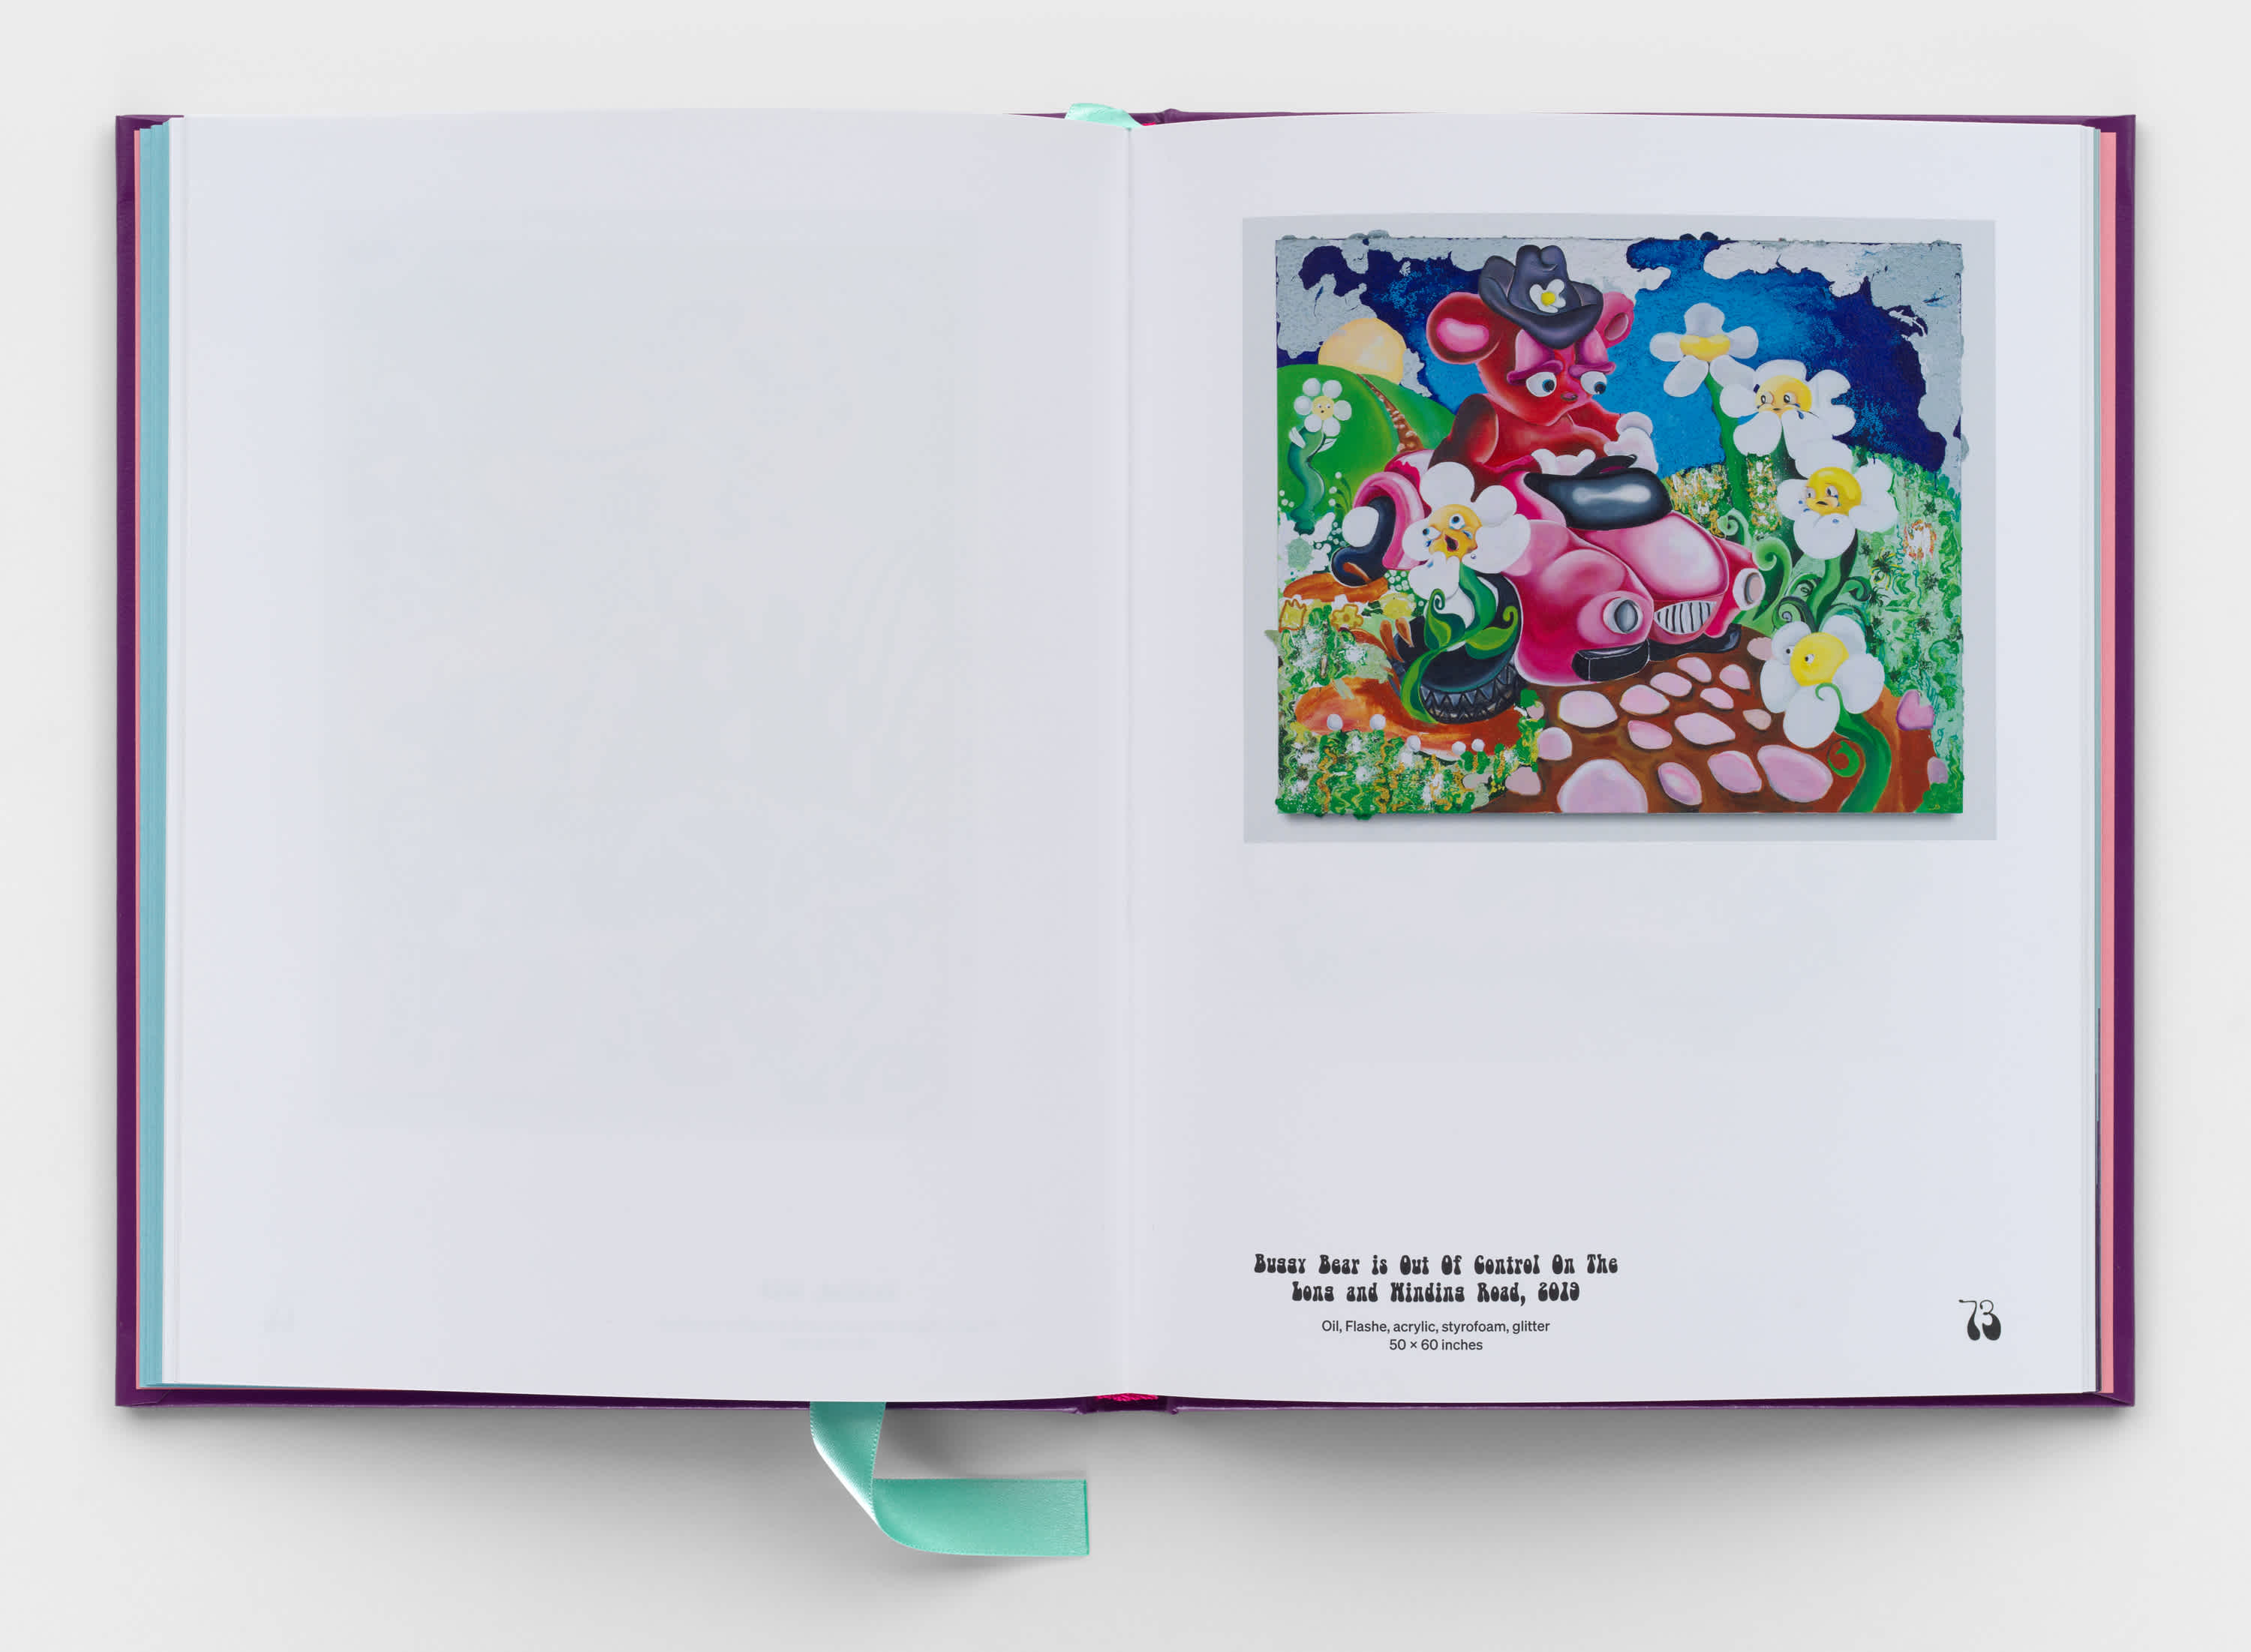 Open book which features a painting of a cartoon, pink bear driving a pink buggy car along a rolling stone road. Several crying sunflowers dot the edge of the road.